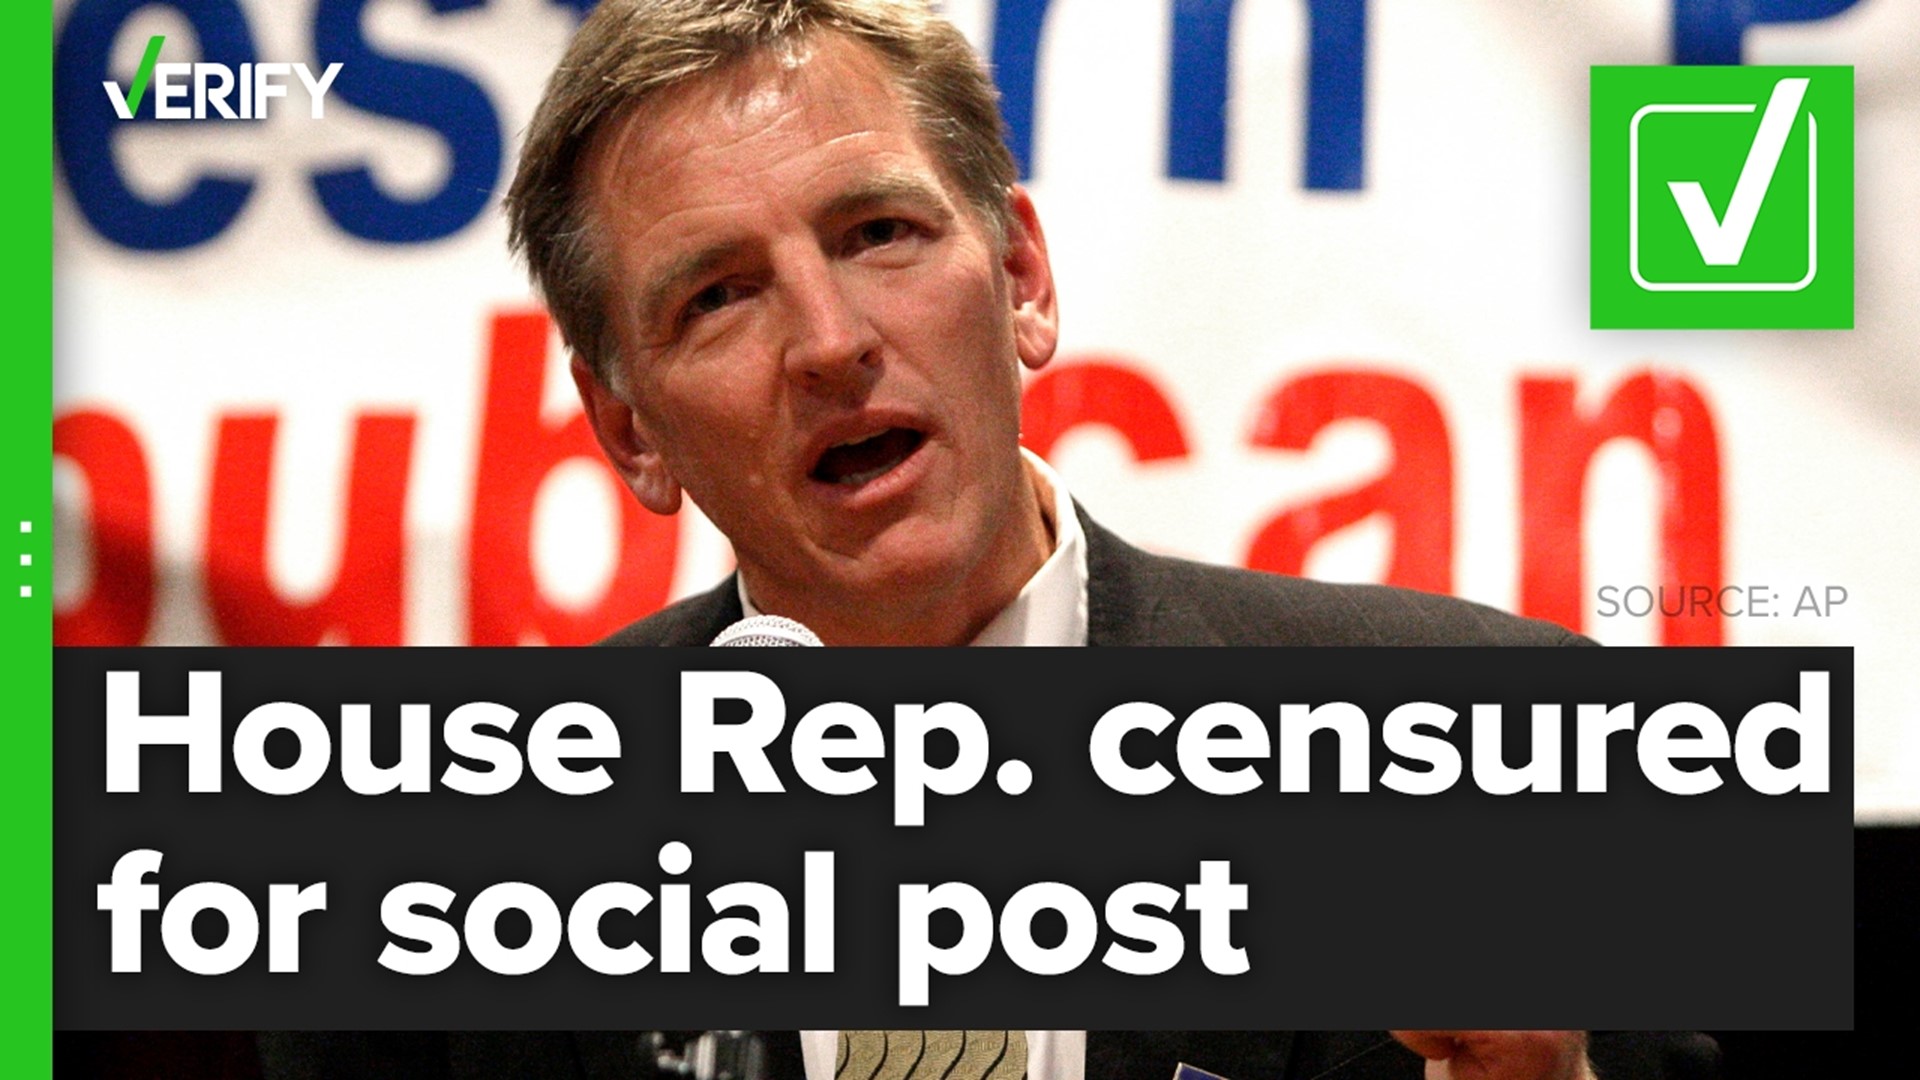 The House of Representatives voted 223-207 to censure Rep. Paul Gosar for posting a graphic video to social media.